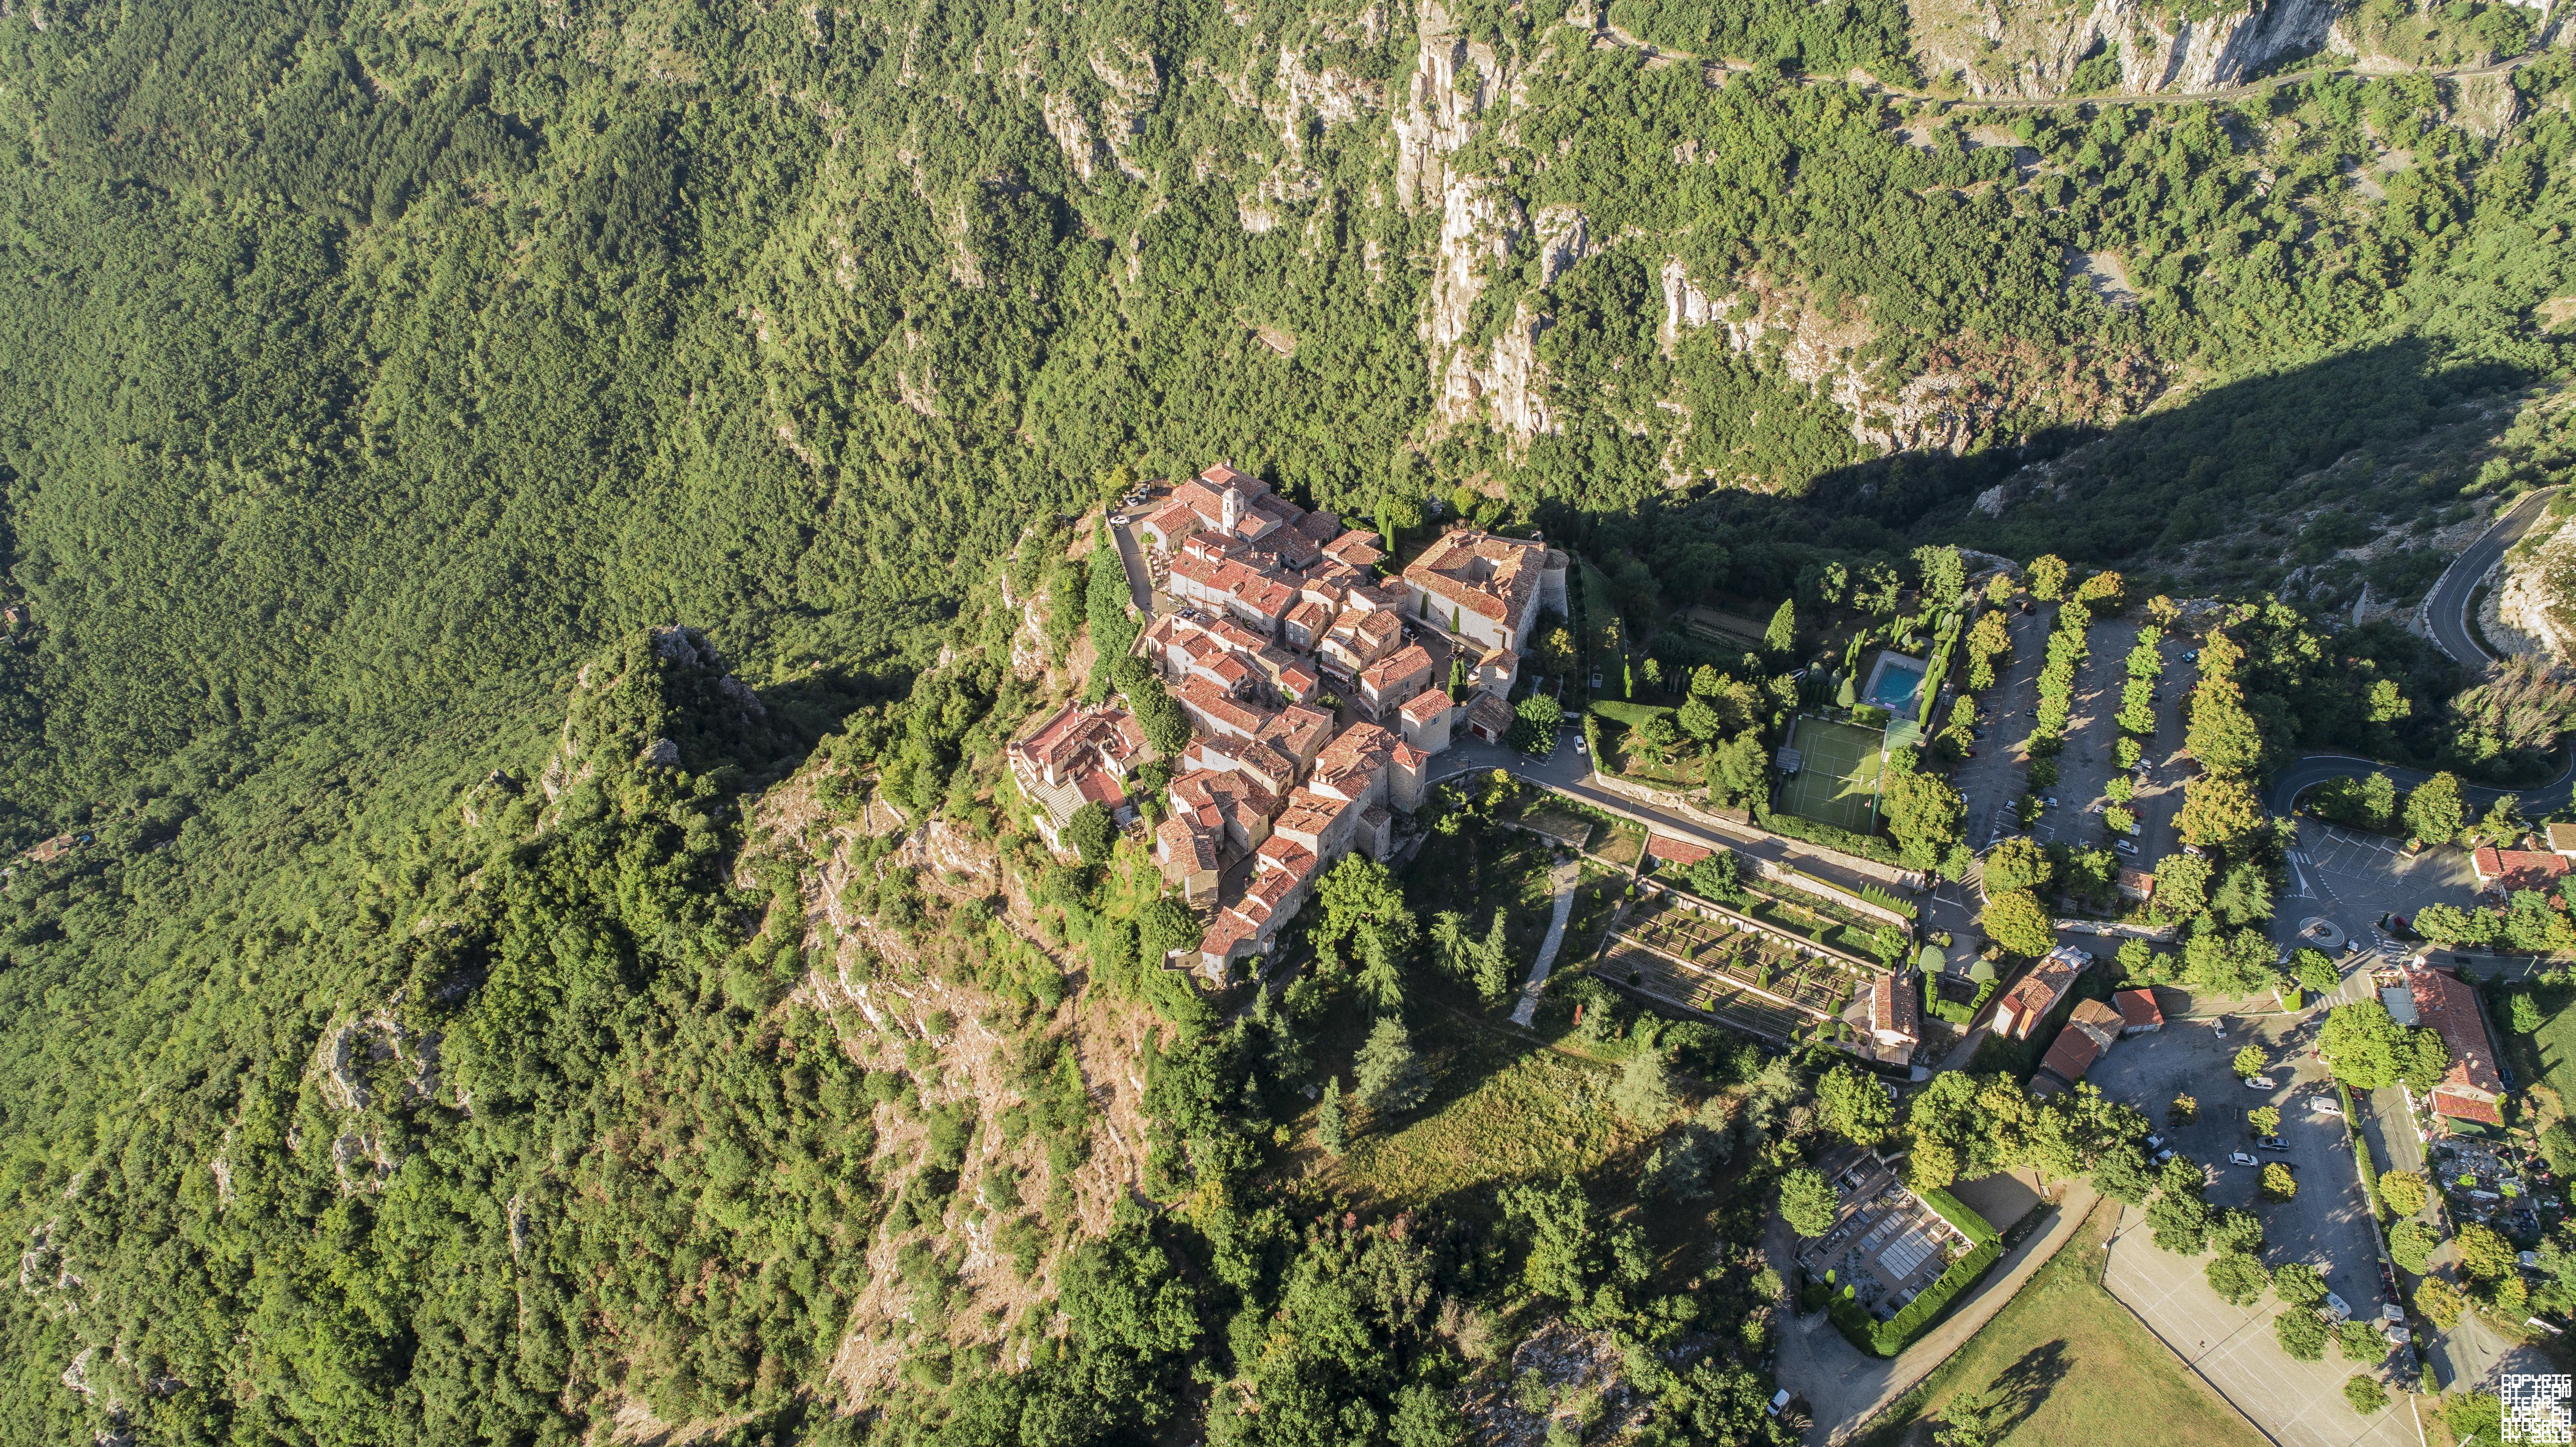 The French village of Gourdon shot from above with a drone